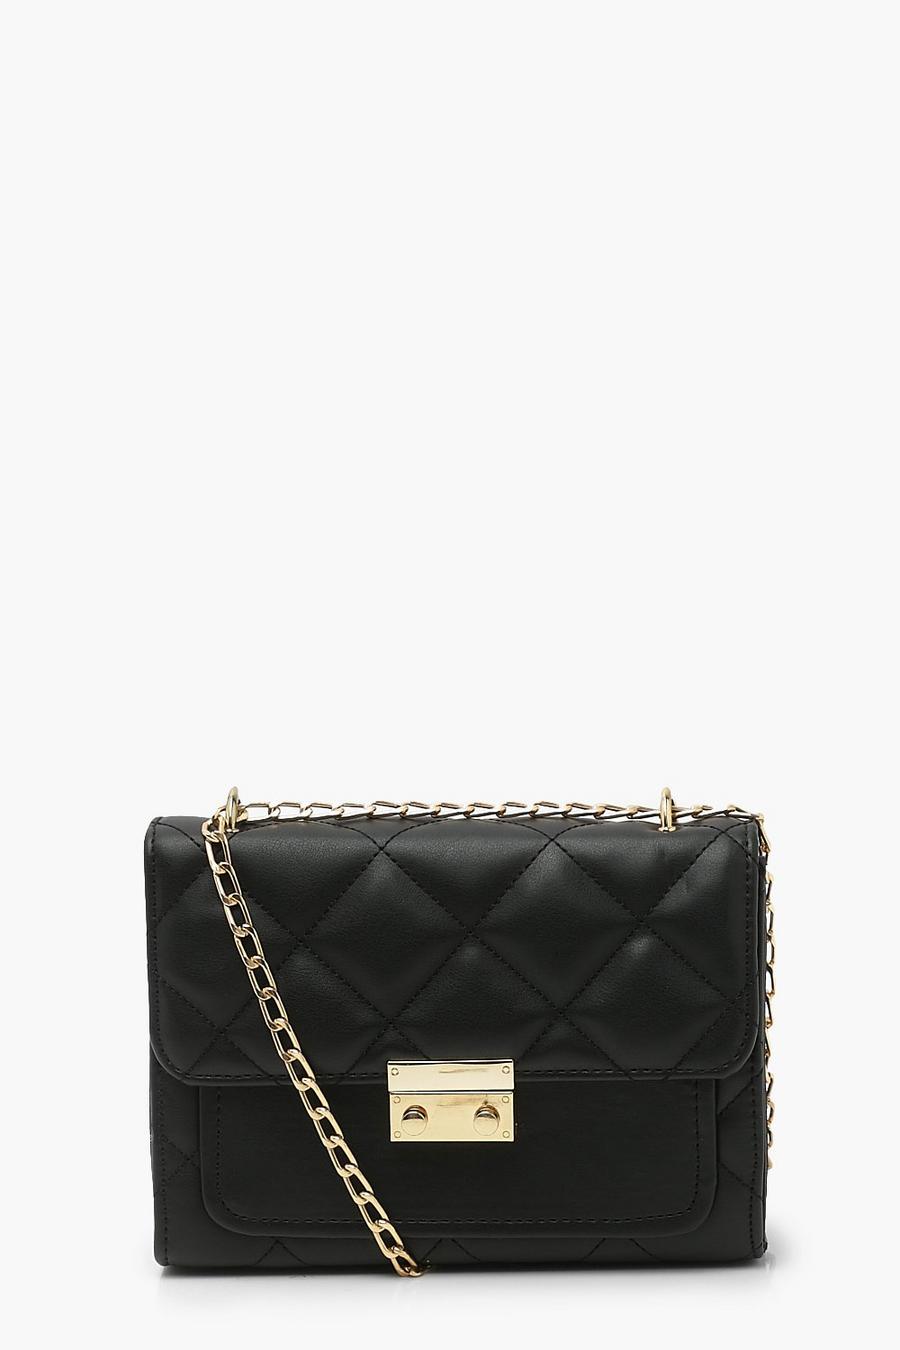 Black Quilted Chain Strap Cross Body Bag image number 1